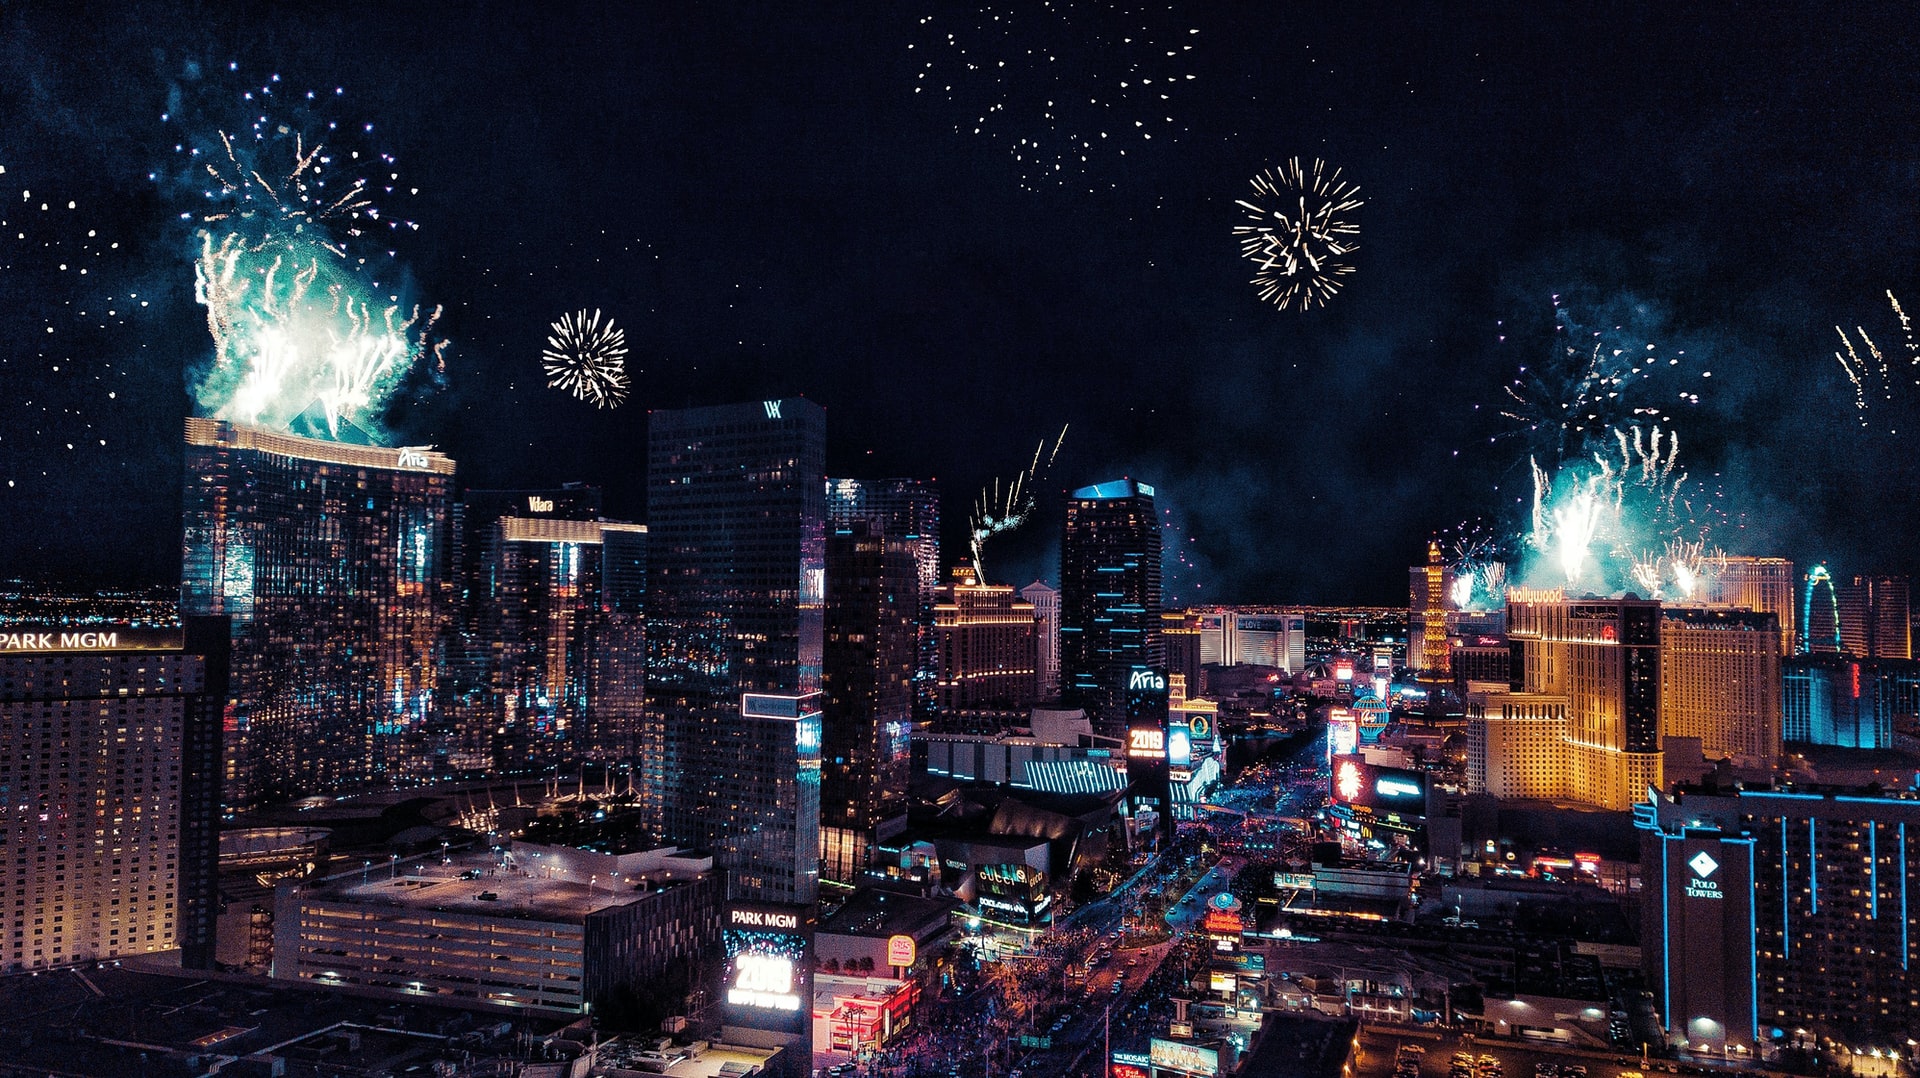 Las Vegas is one of the best destinations in the US for New Year's Eve